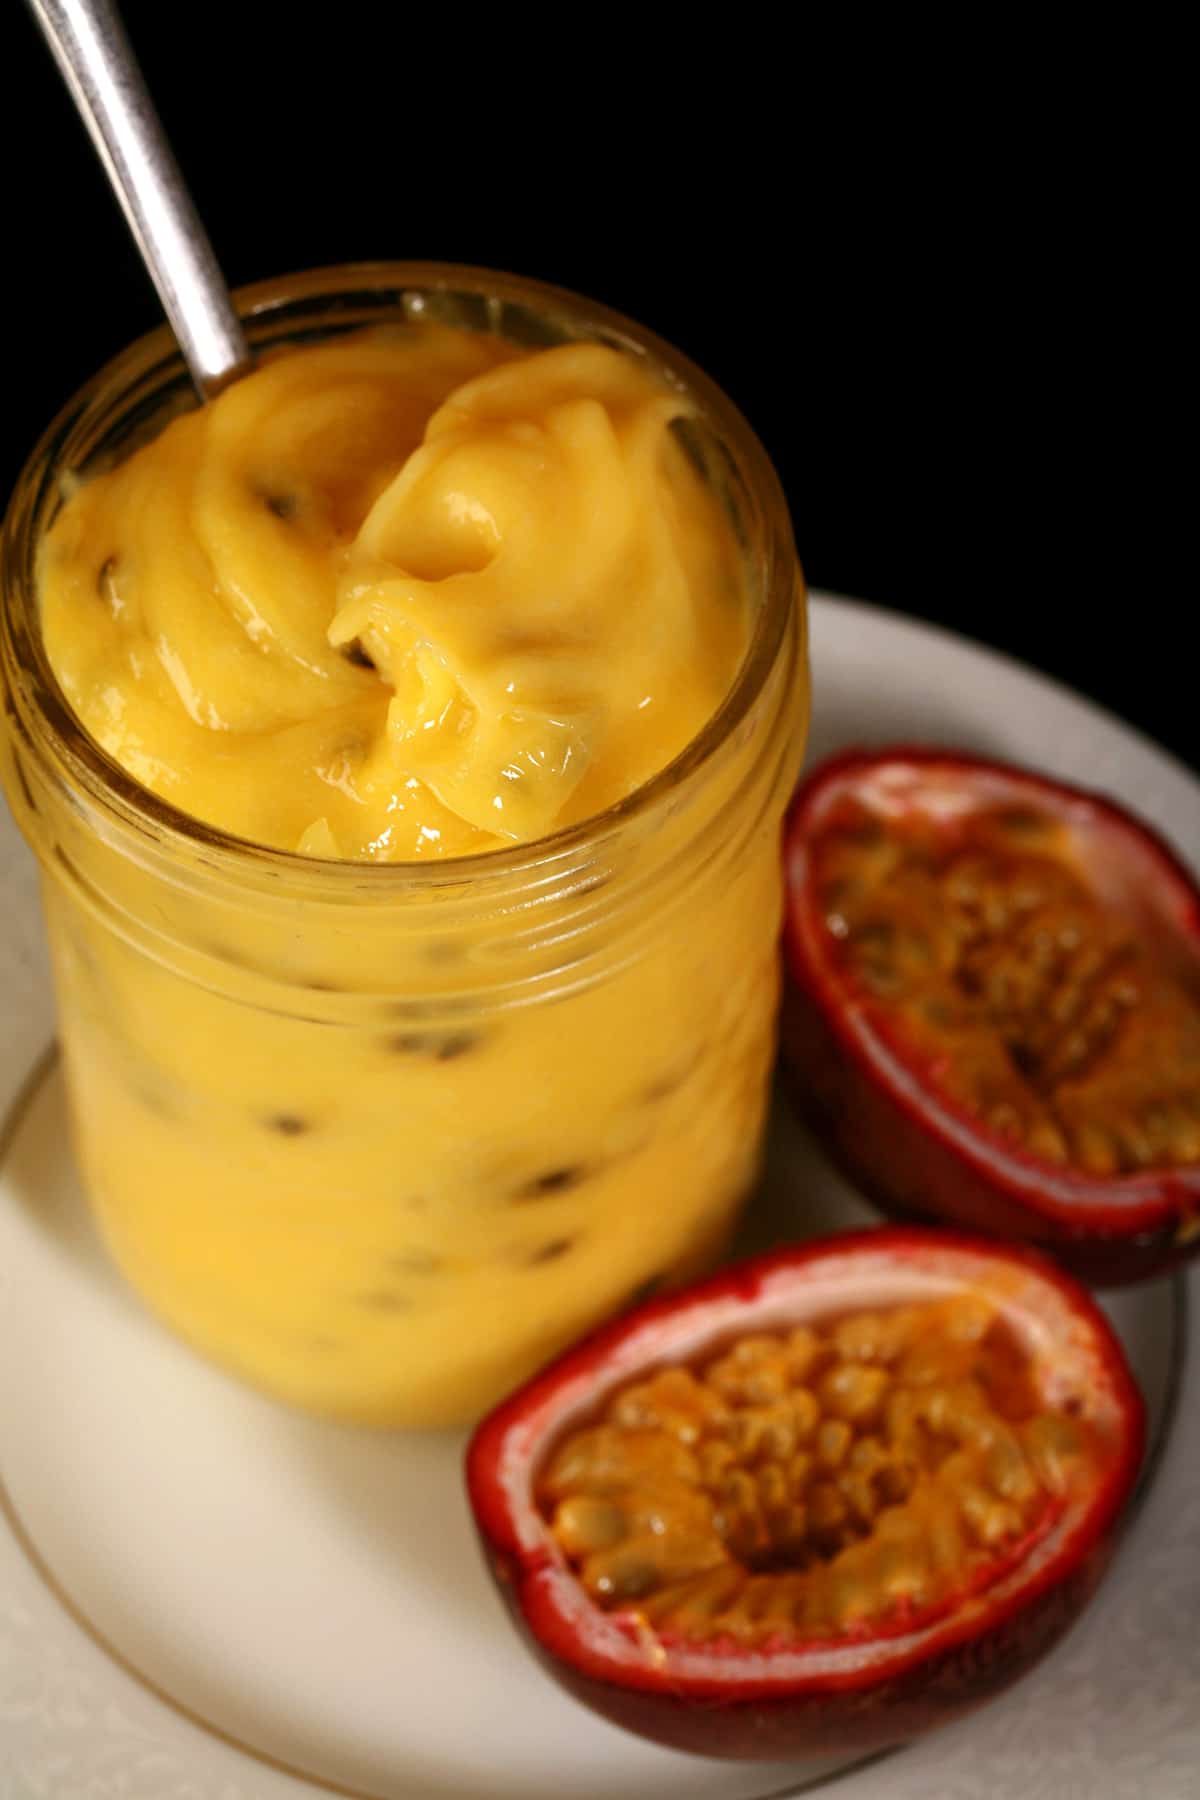 A jar of passion fruit curd on a plate, along with a sliced passionfruit.